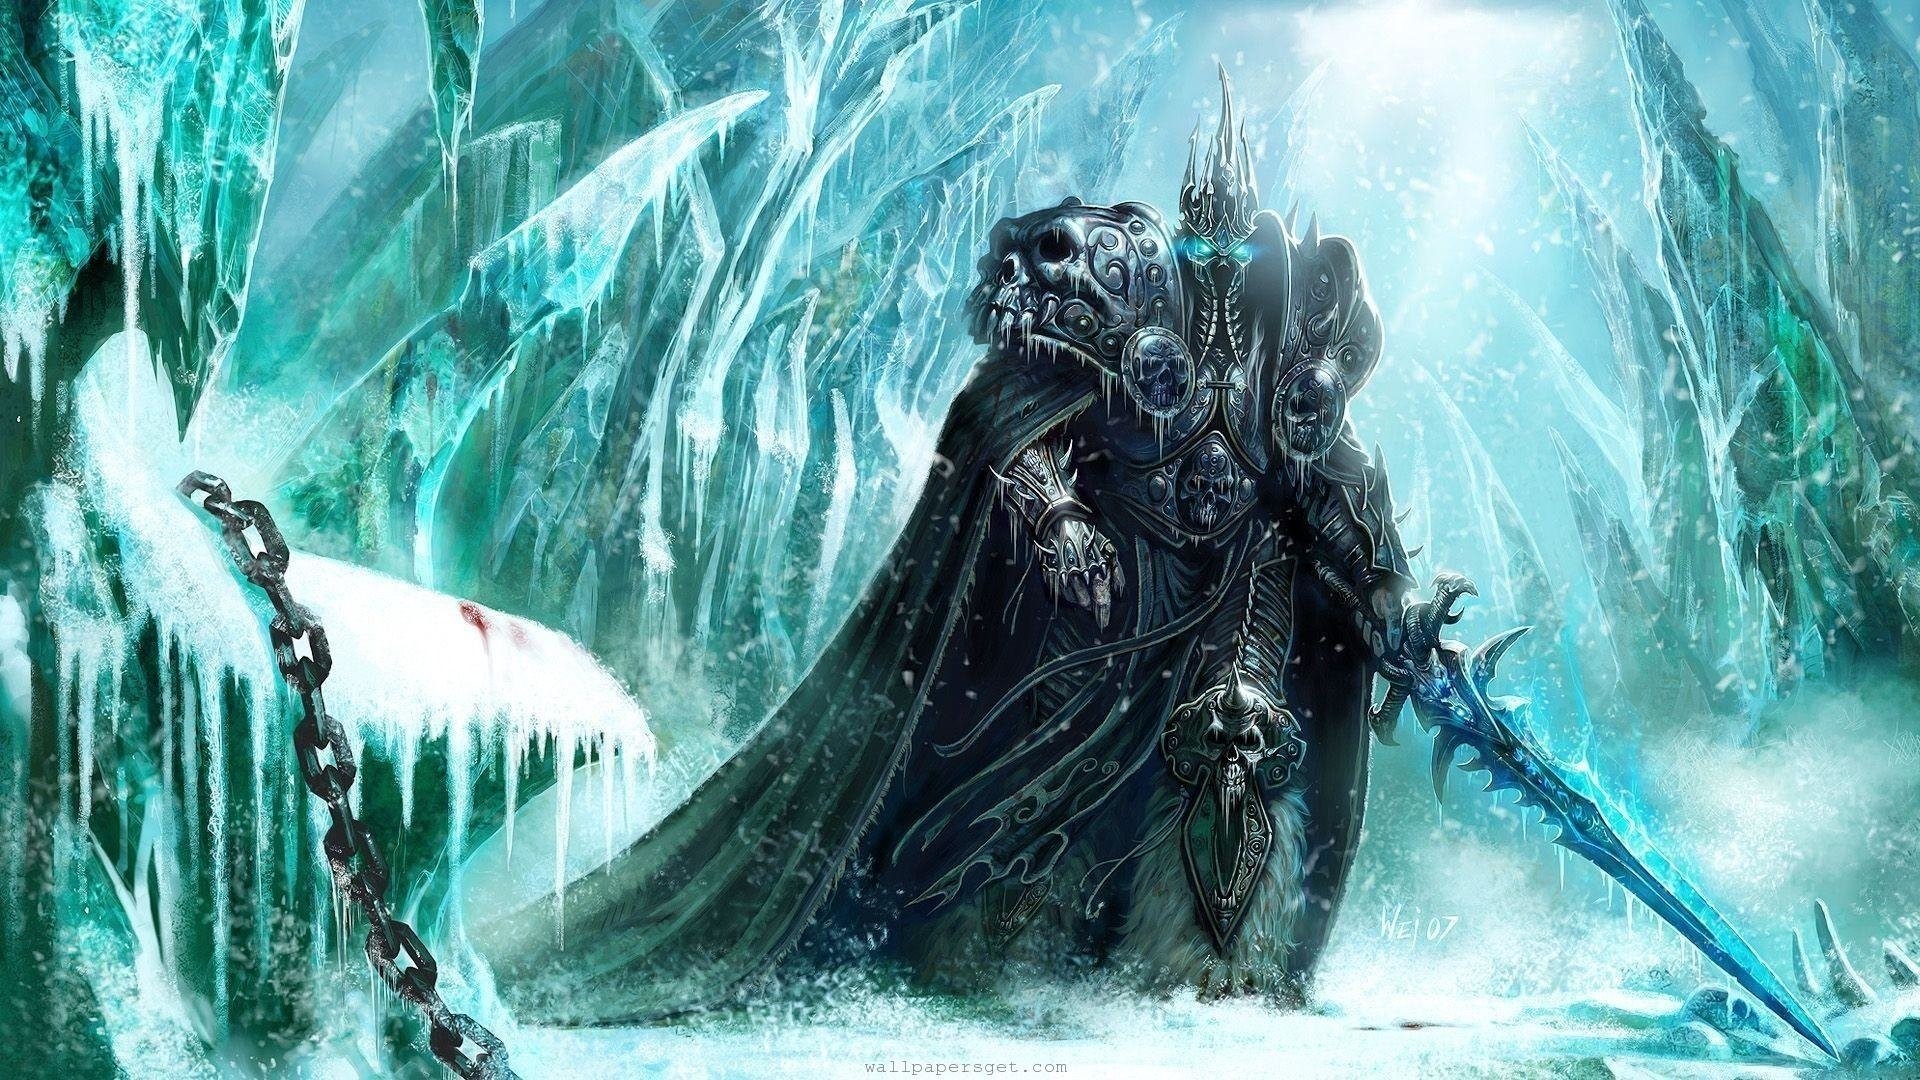 1920x1080 Computerspiele - World Of Warcraft: Wrath Of The Lich King Wallpaper